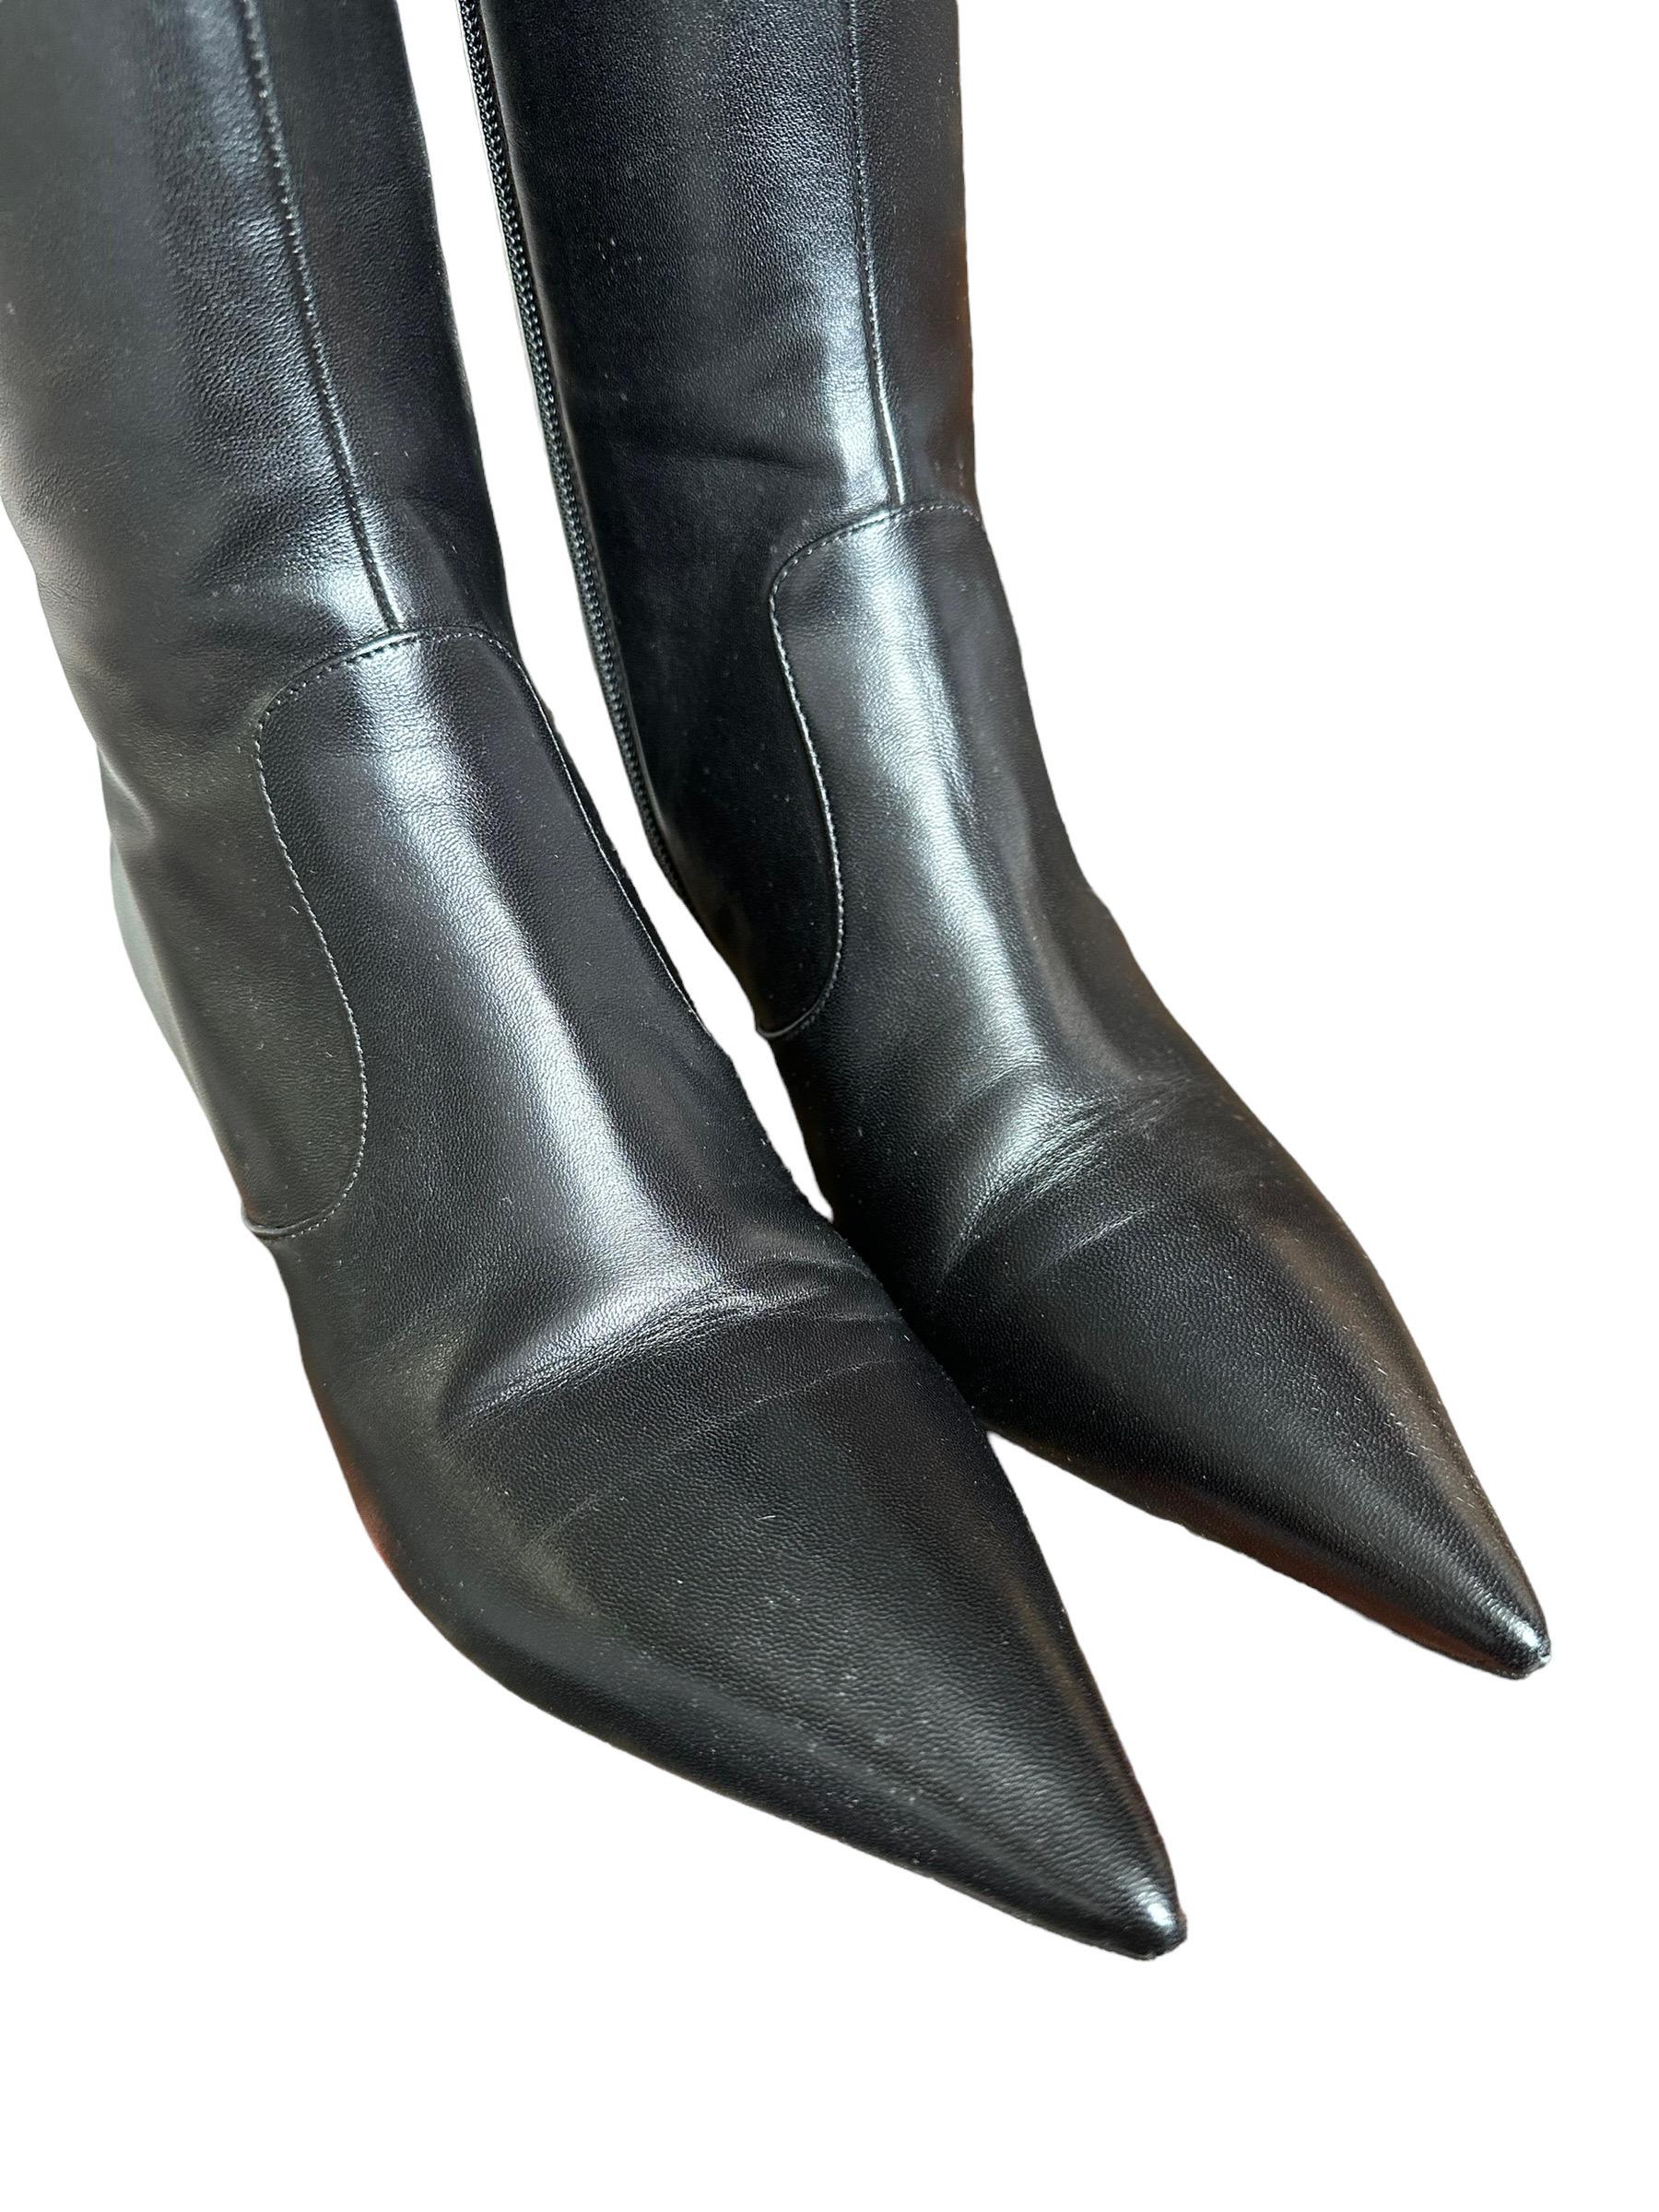 Dior Boots Black Leather Low Heels 1